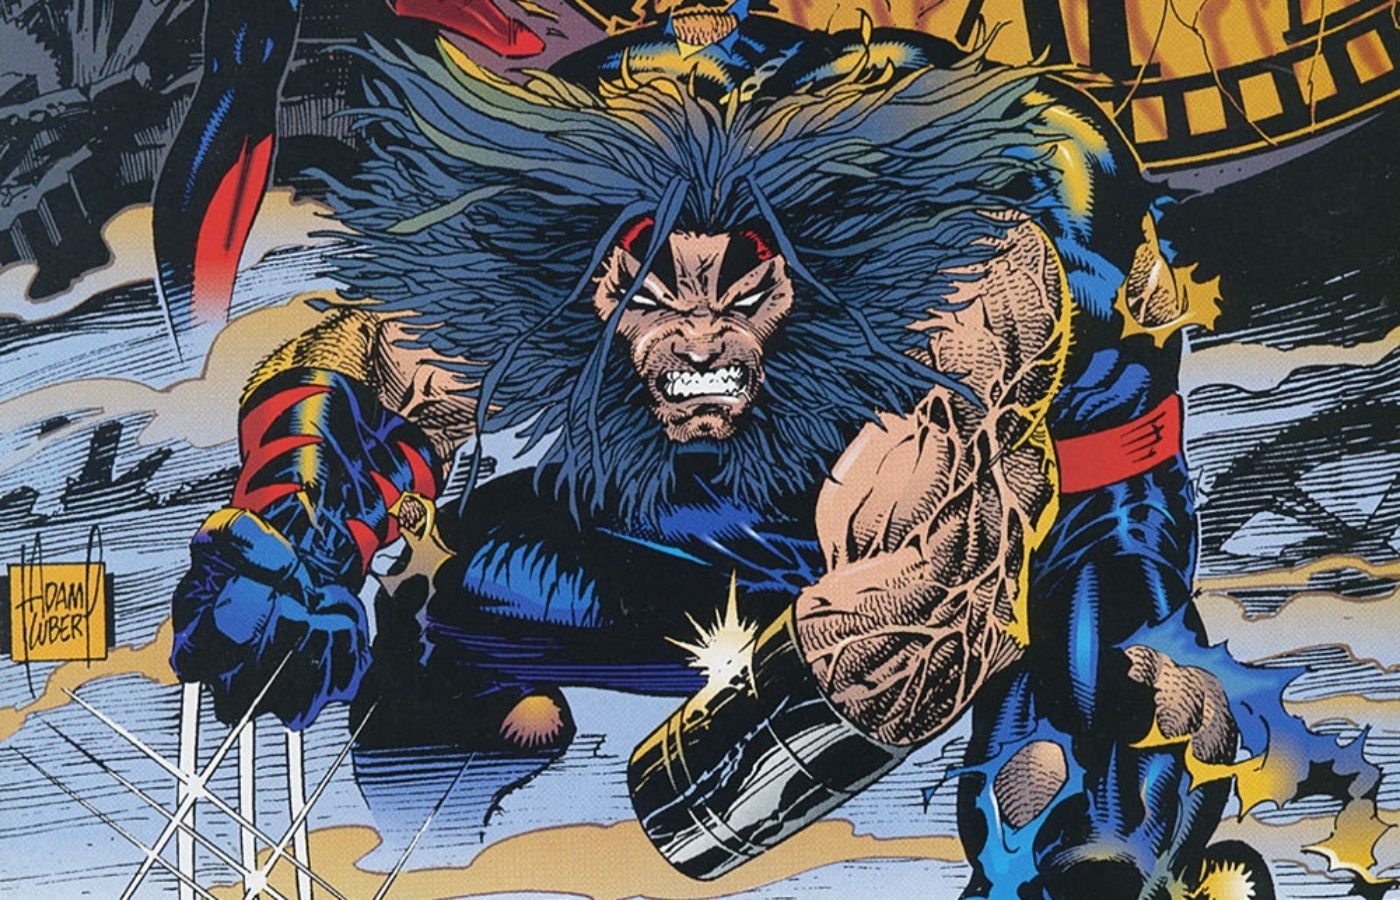 One-handed Wolverine crouched with his claws drawn in the Age of Apocalypse.